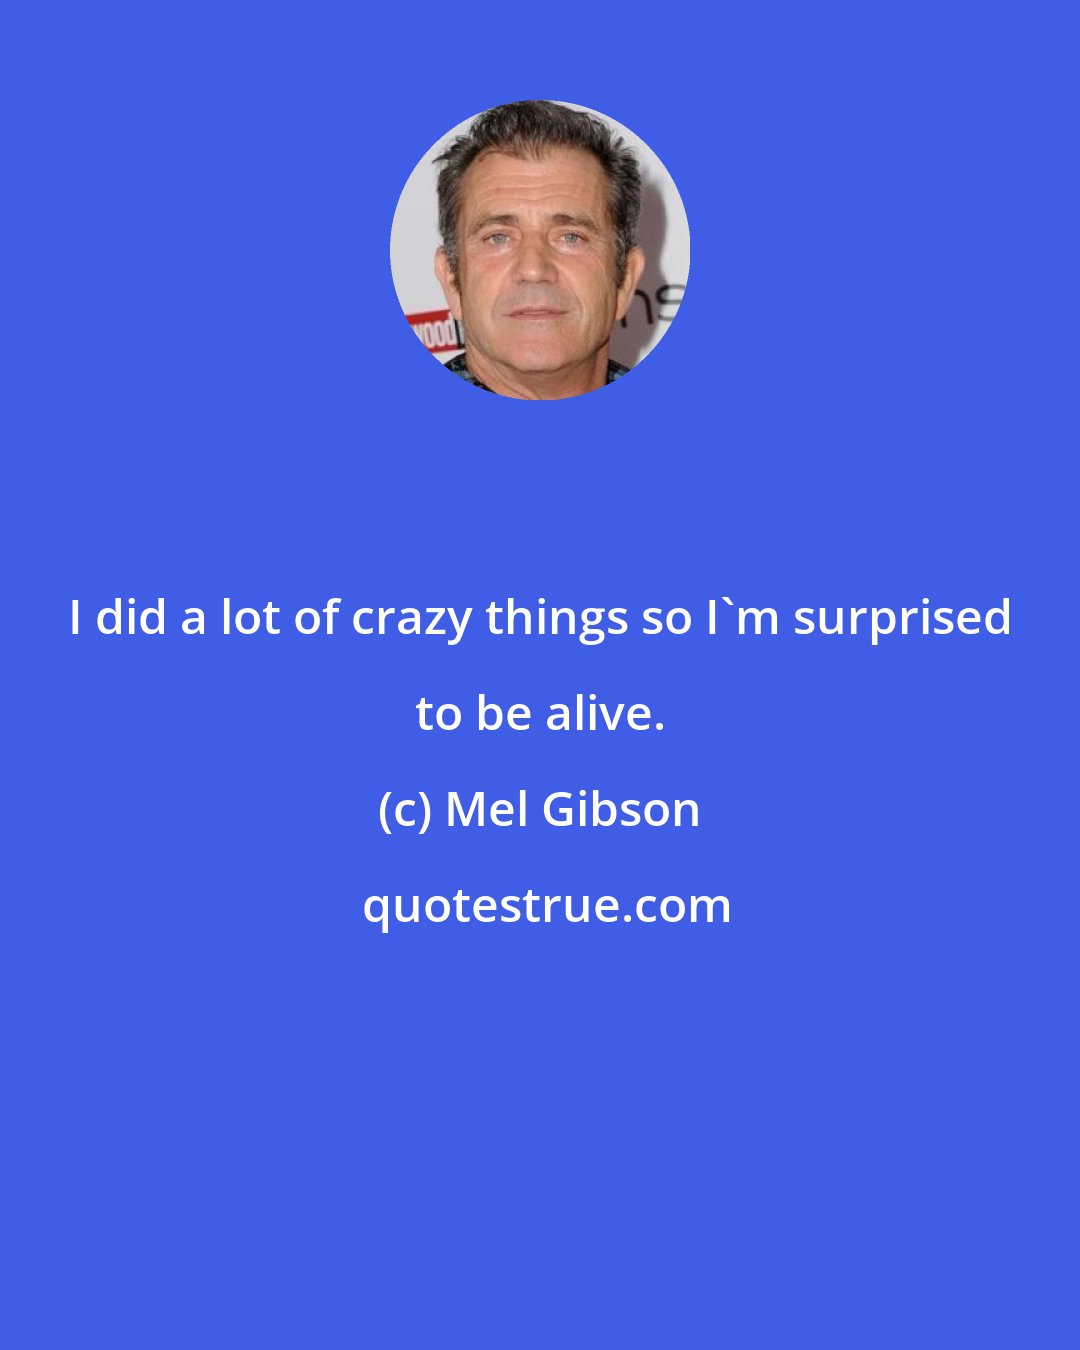 Mel Gibson: I did a lot of crazy things so I'm surprised to be alive.